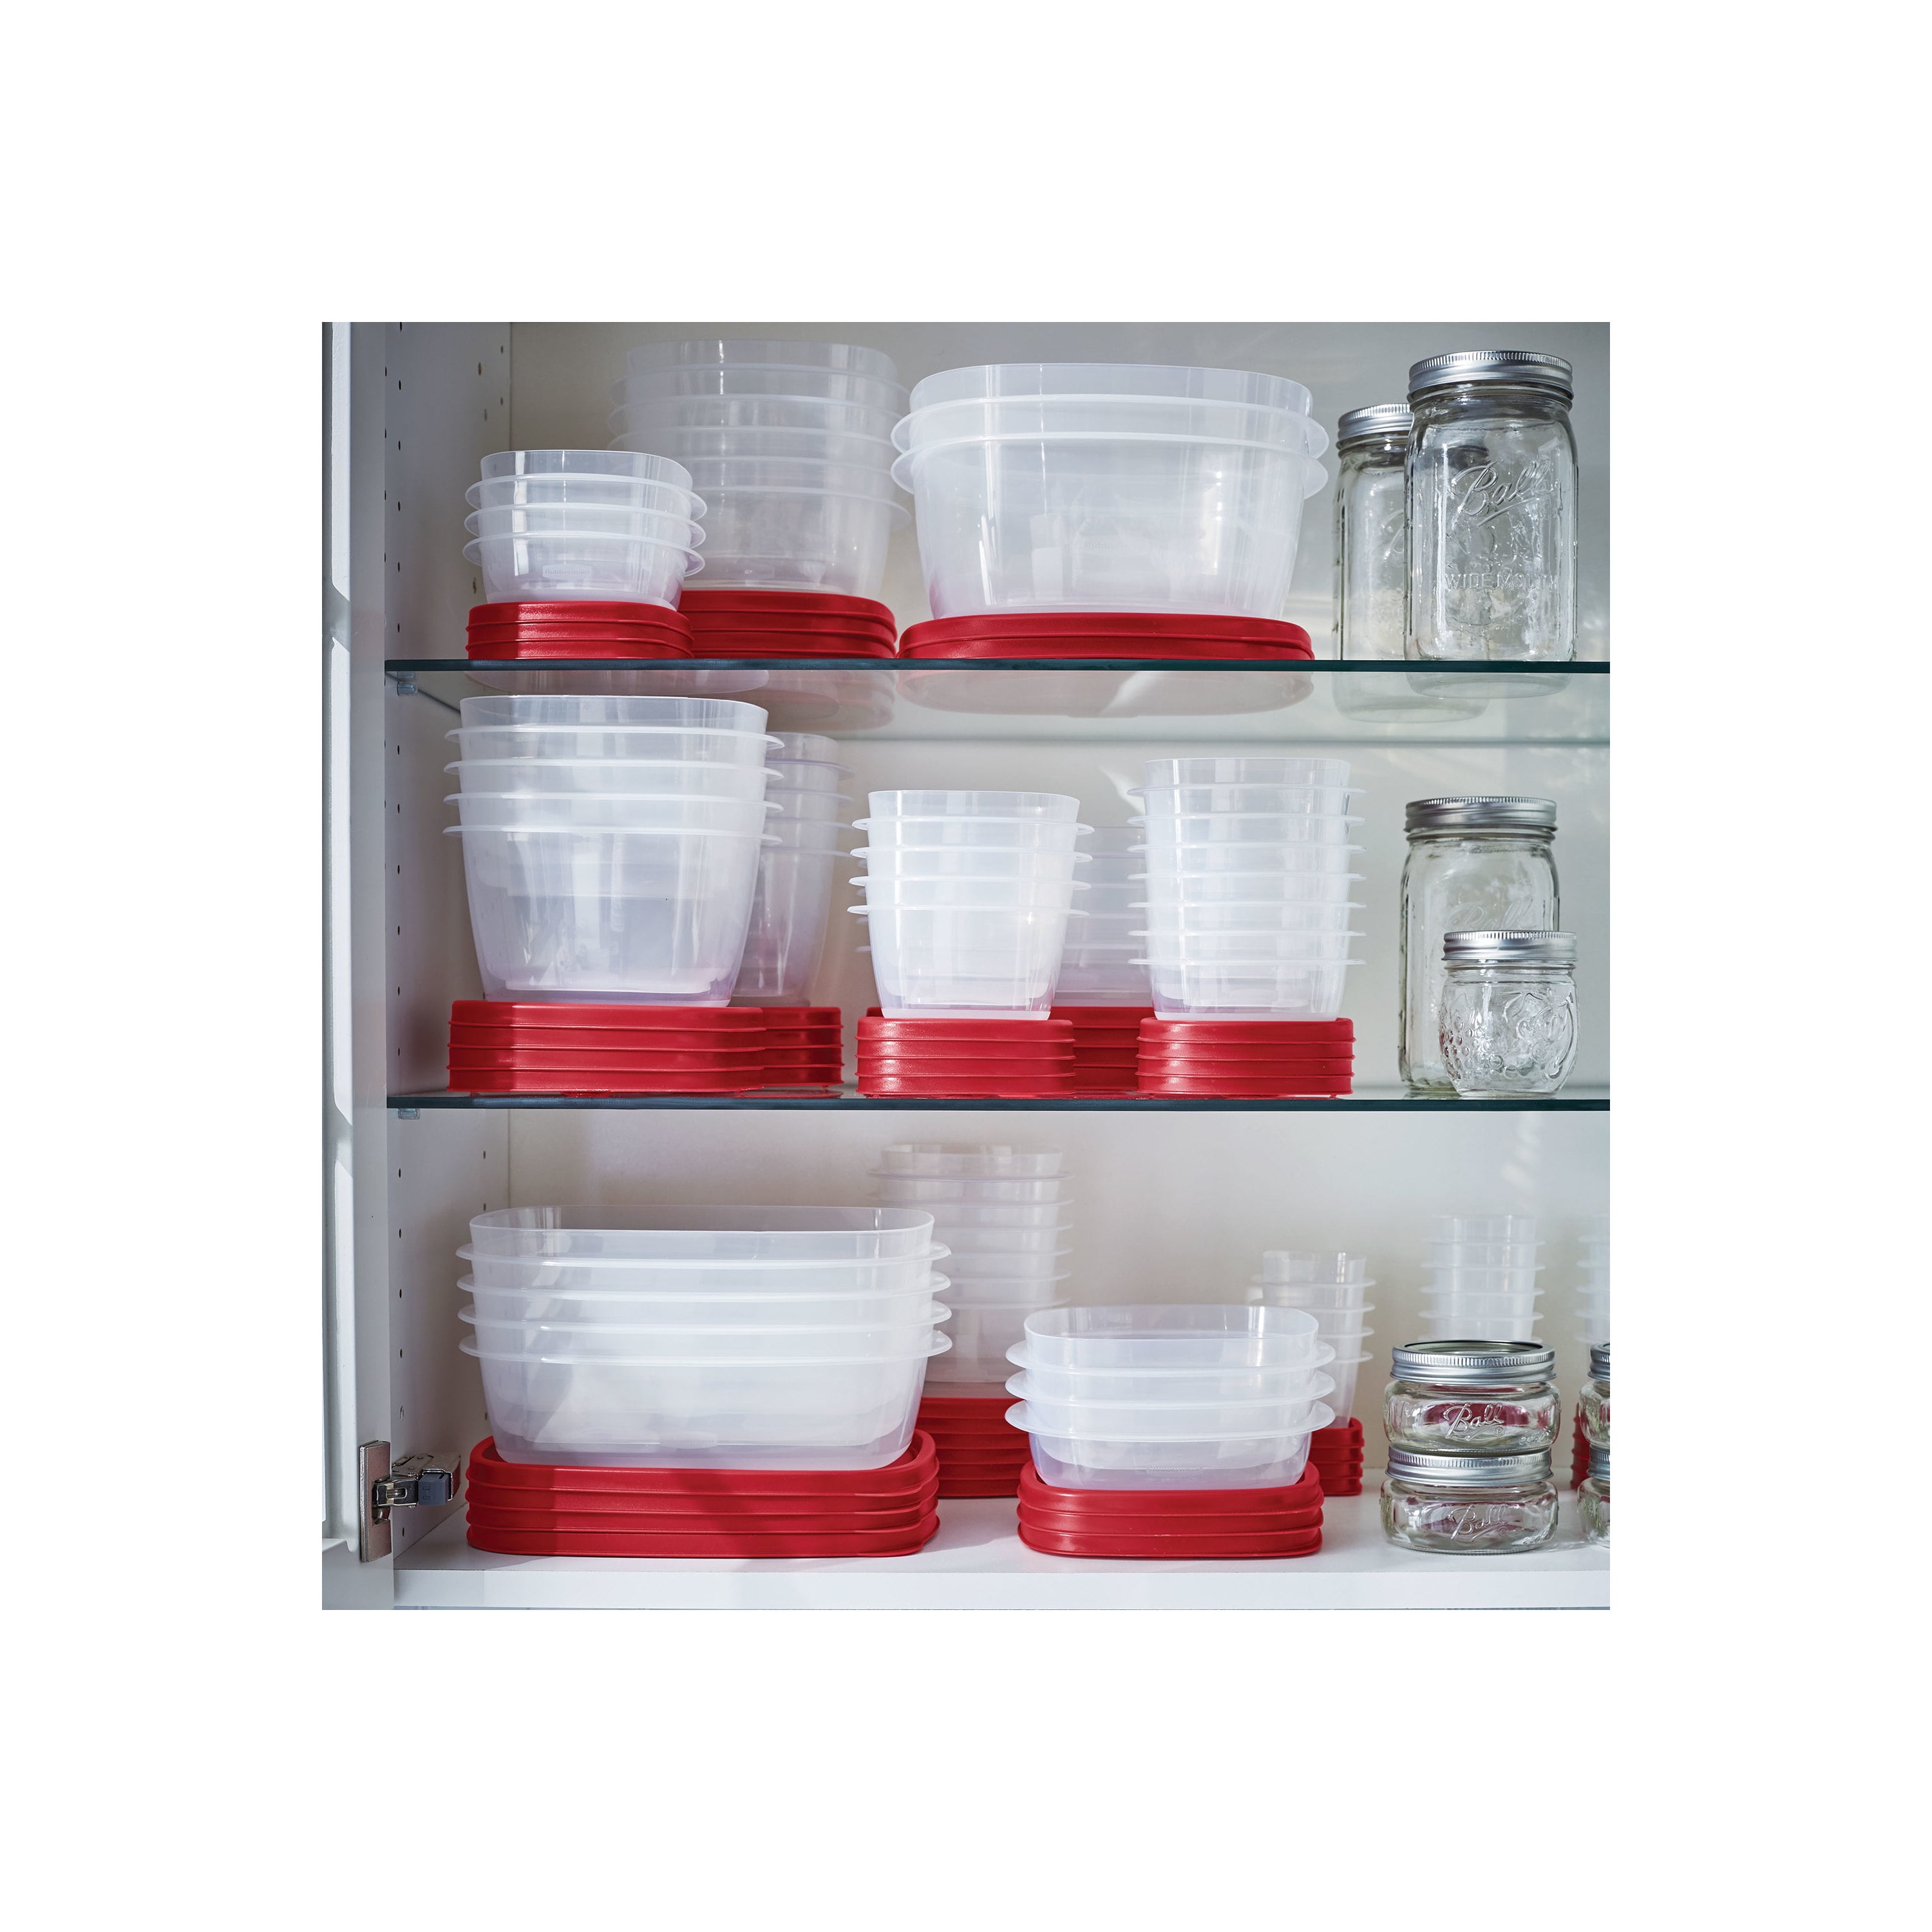 Food Storage Containers With Locking Lids - 26 Piece Set